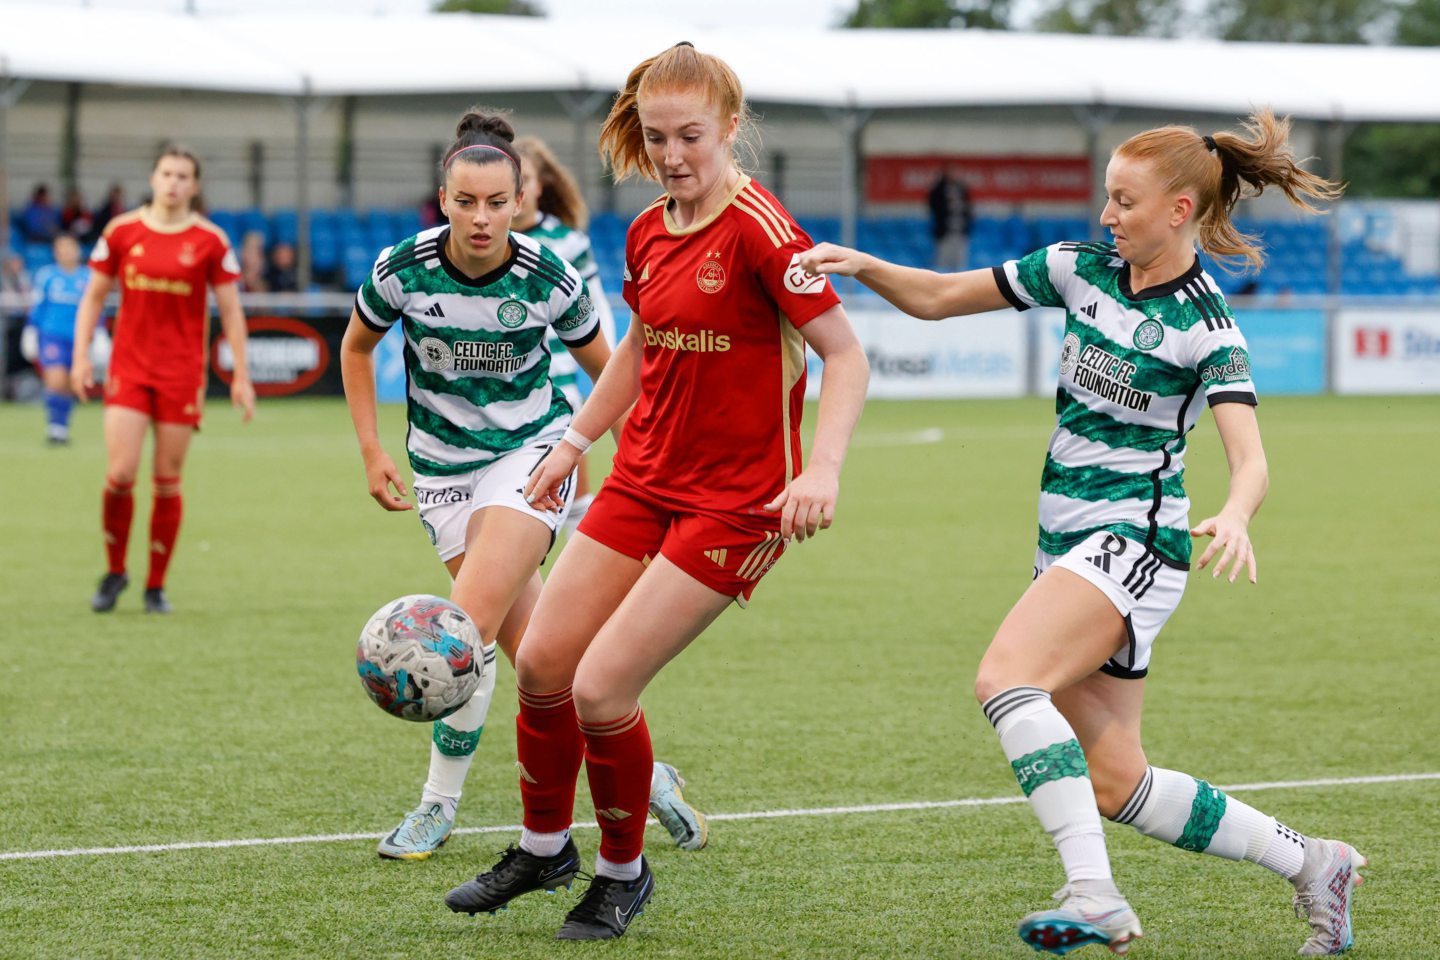 Aberdeen women's Eilidh Shore in action against Celtic at Cove Rangers' Balmoral Stadium